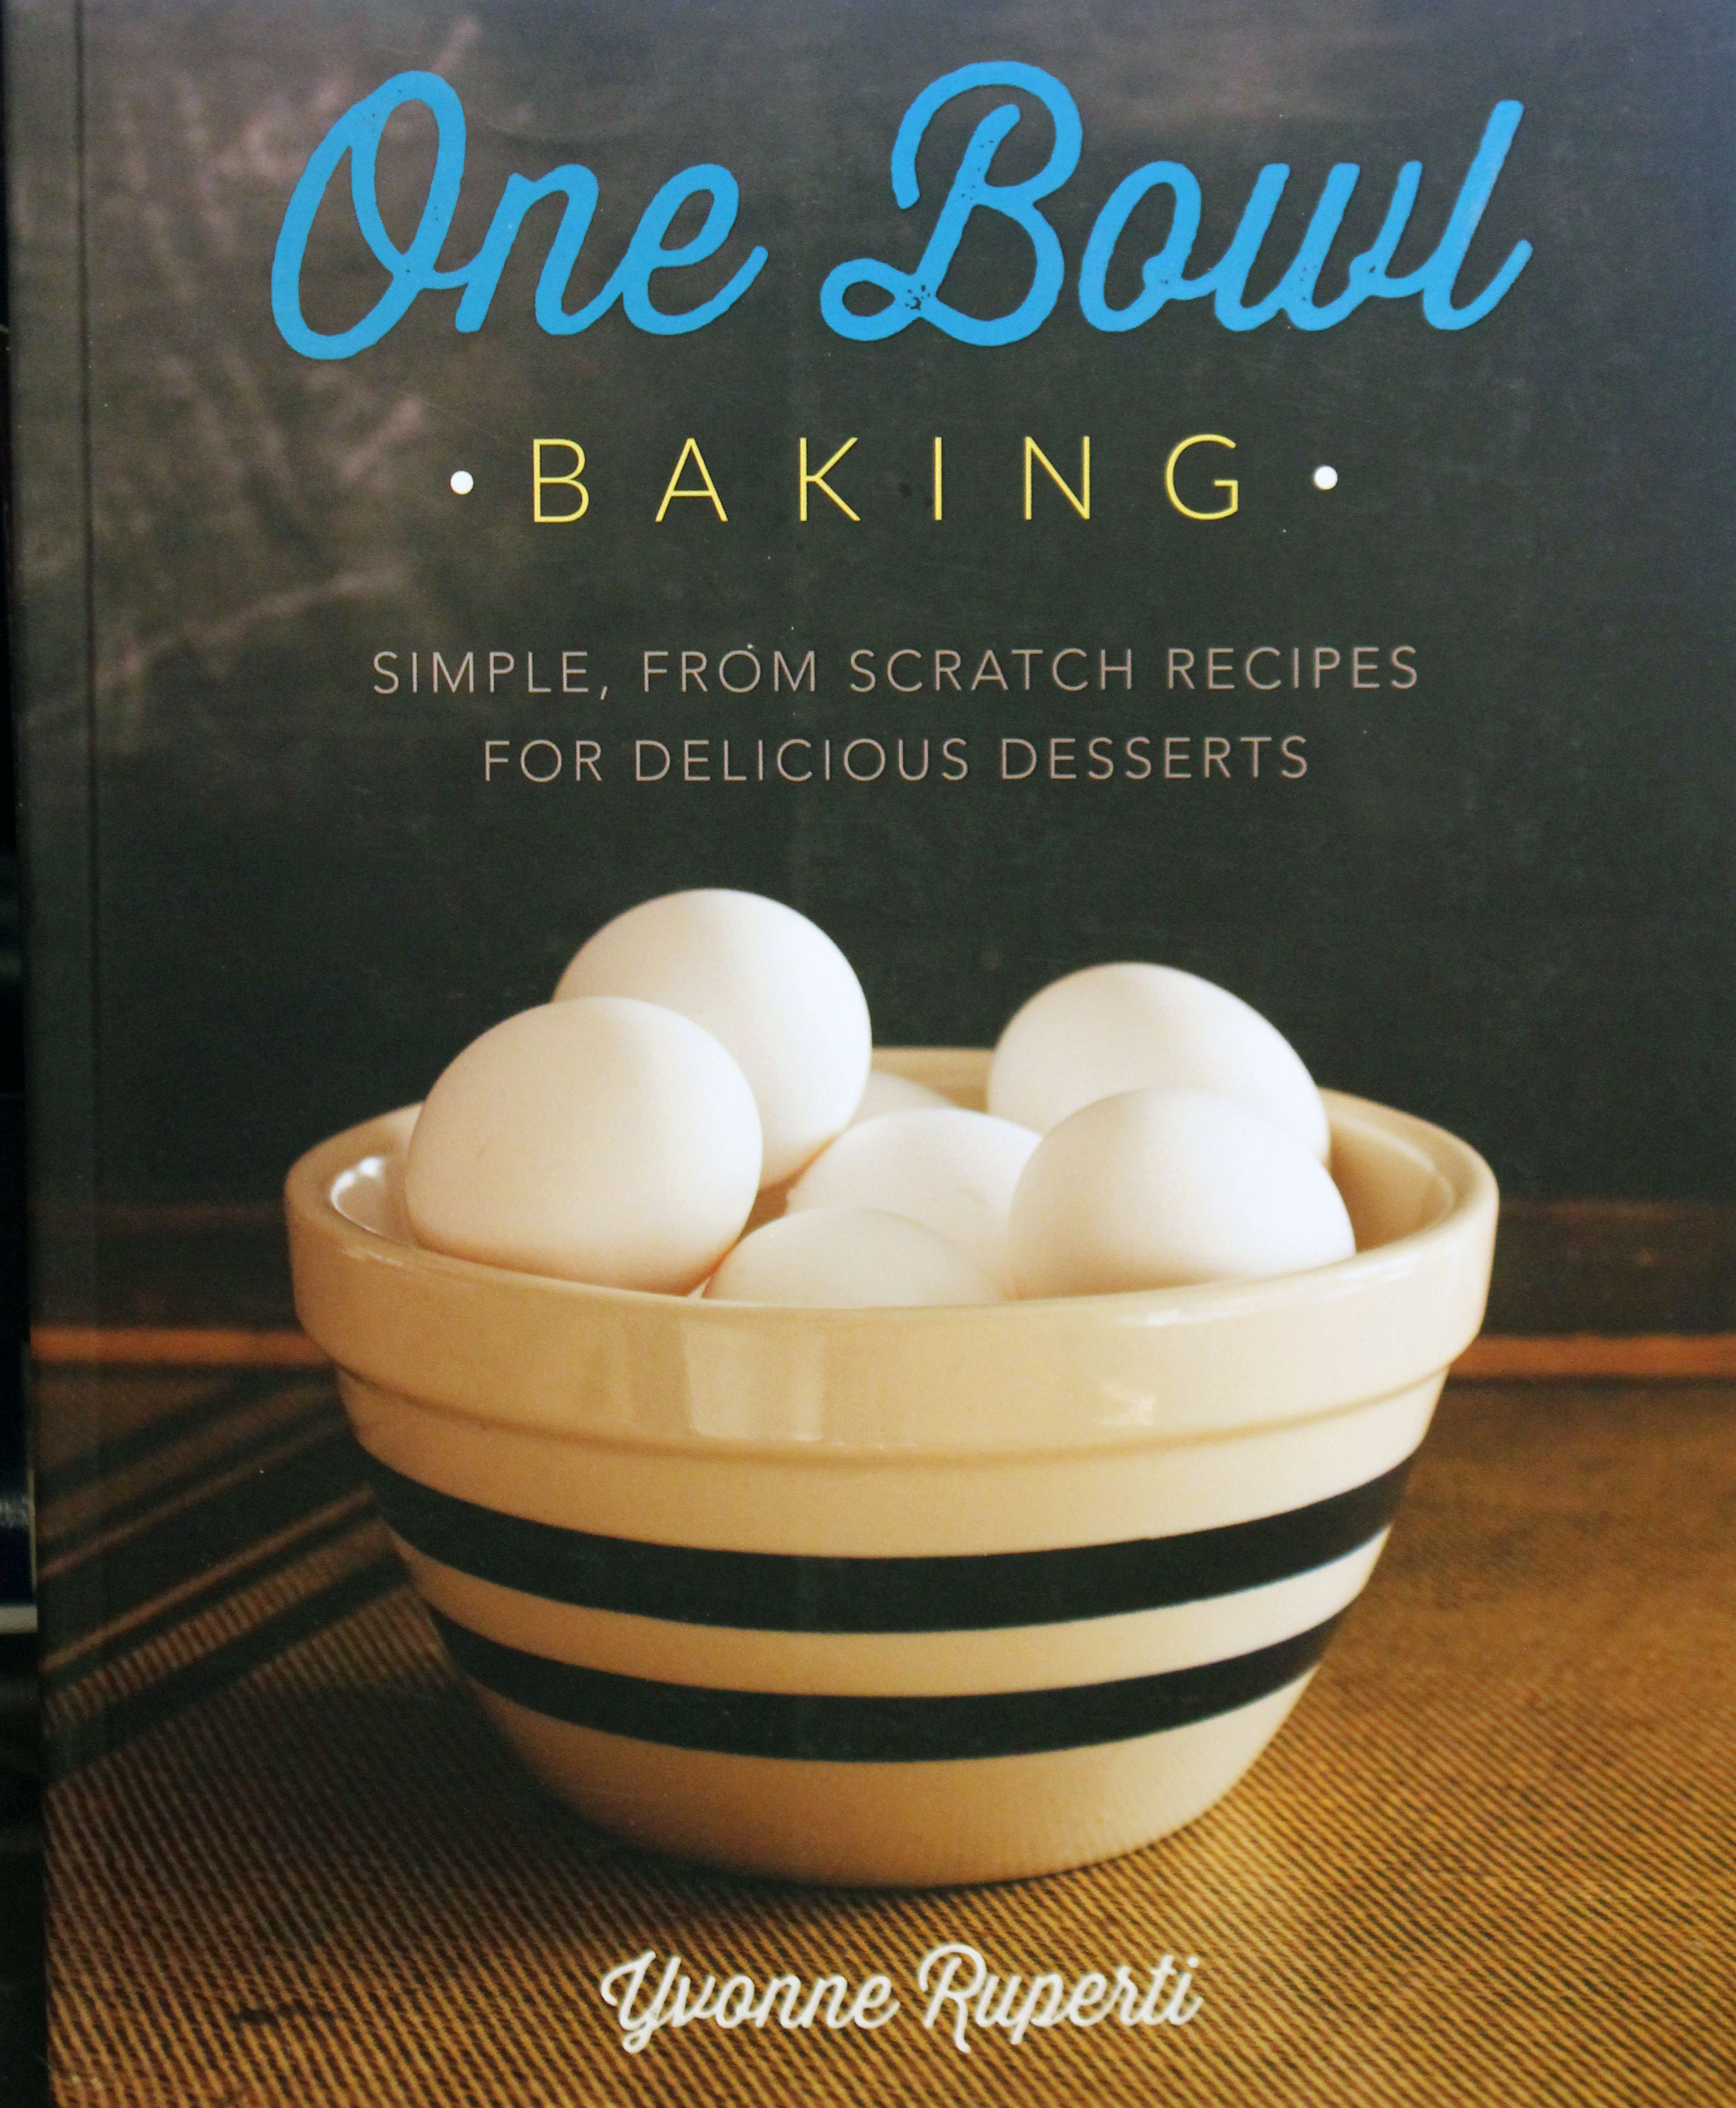 TBT Cookbook Review: One Bowl Baking [2013]